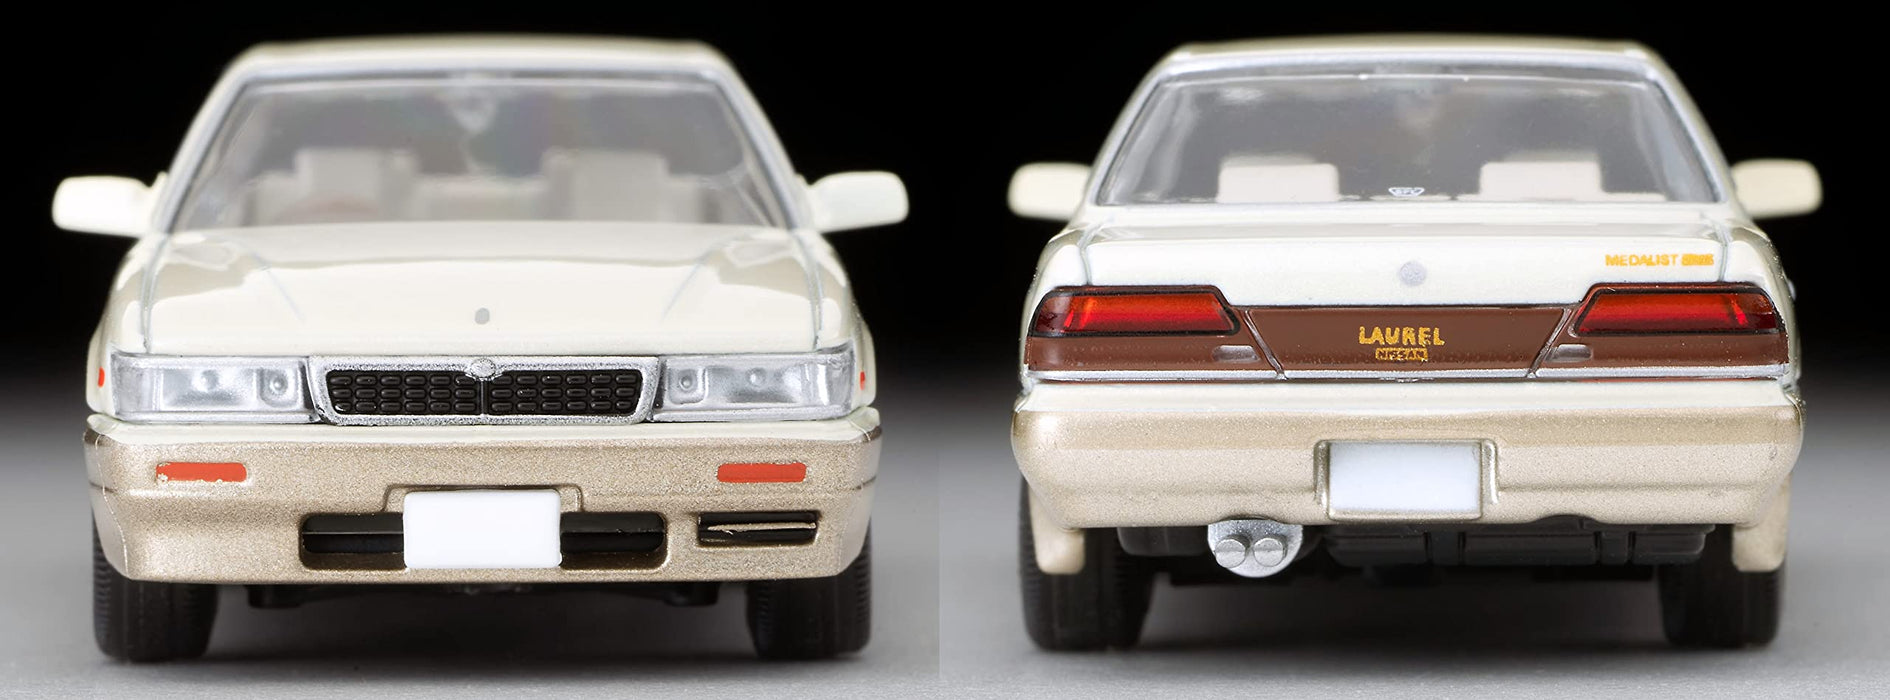 Tomytec Tomica Limited Vintage Neo Nissan Laurel 1/64 Scale Twin Cam Turbo - White/Gold